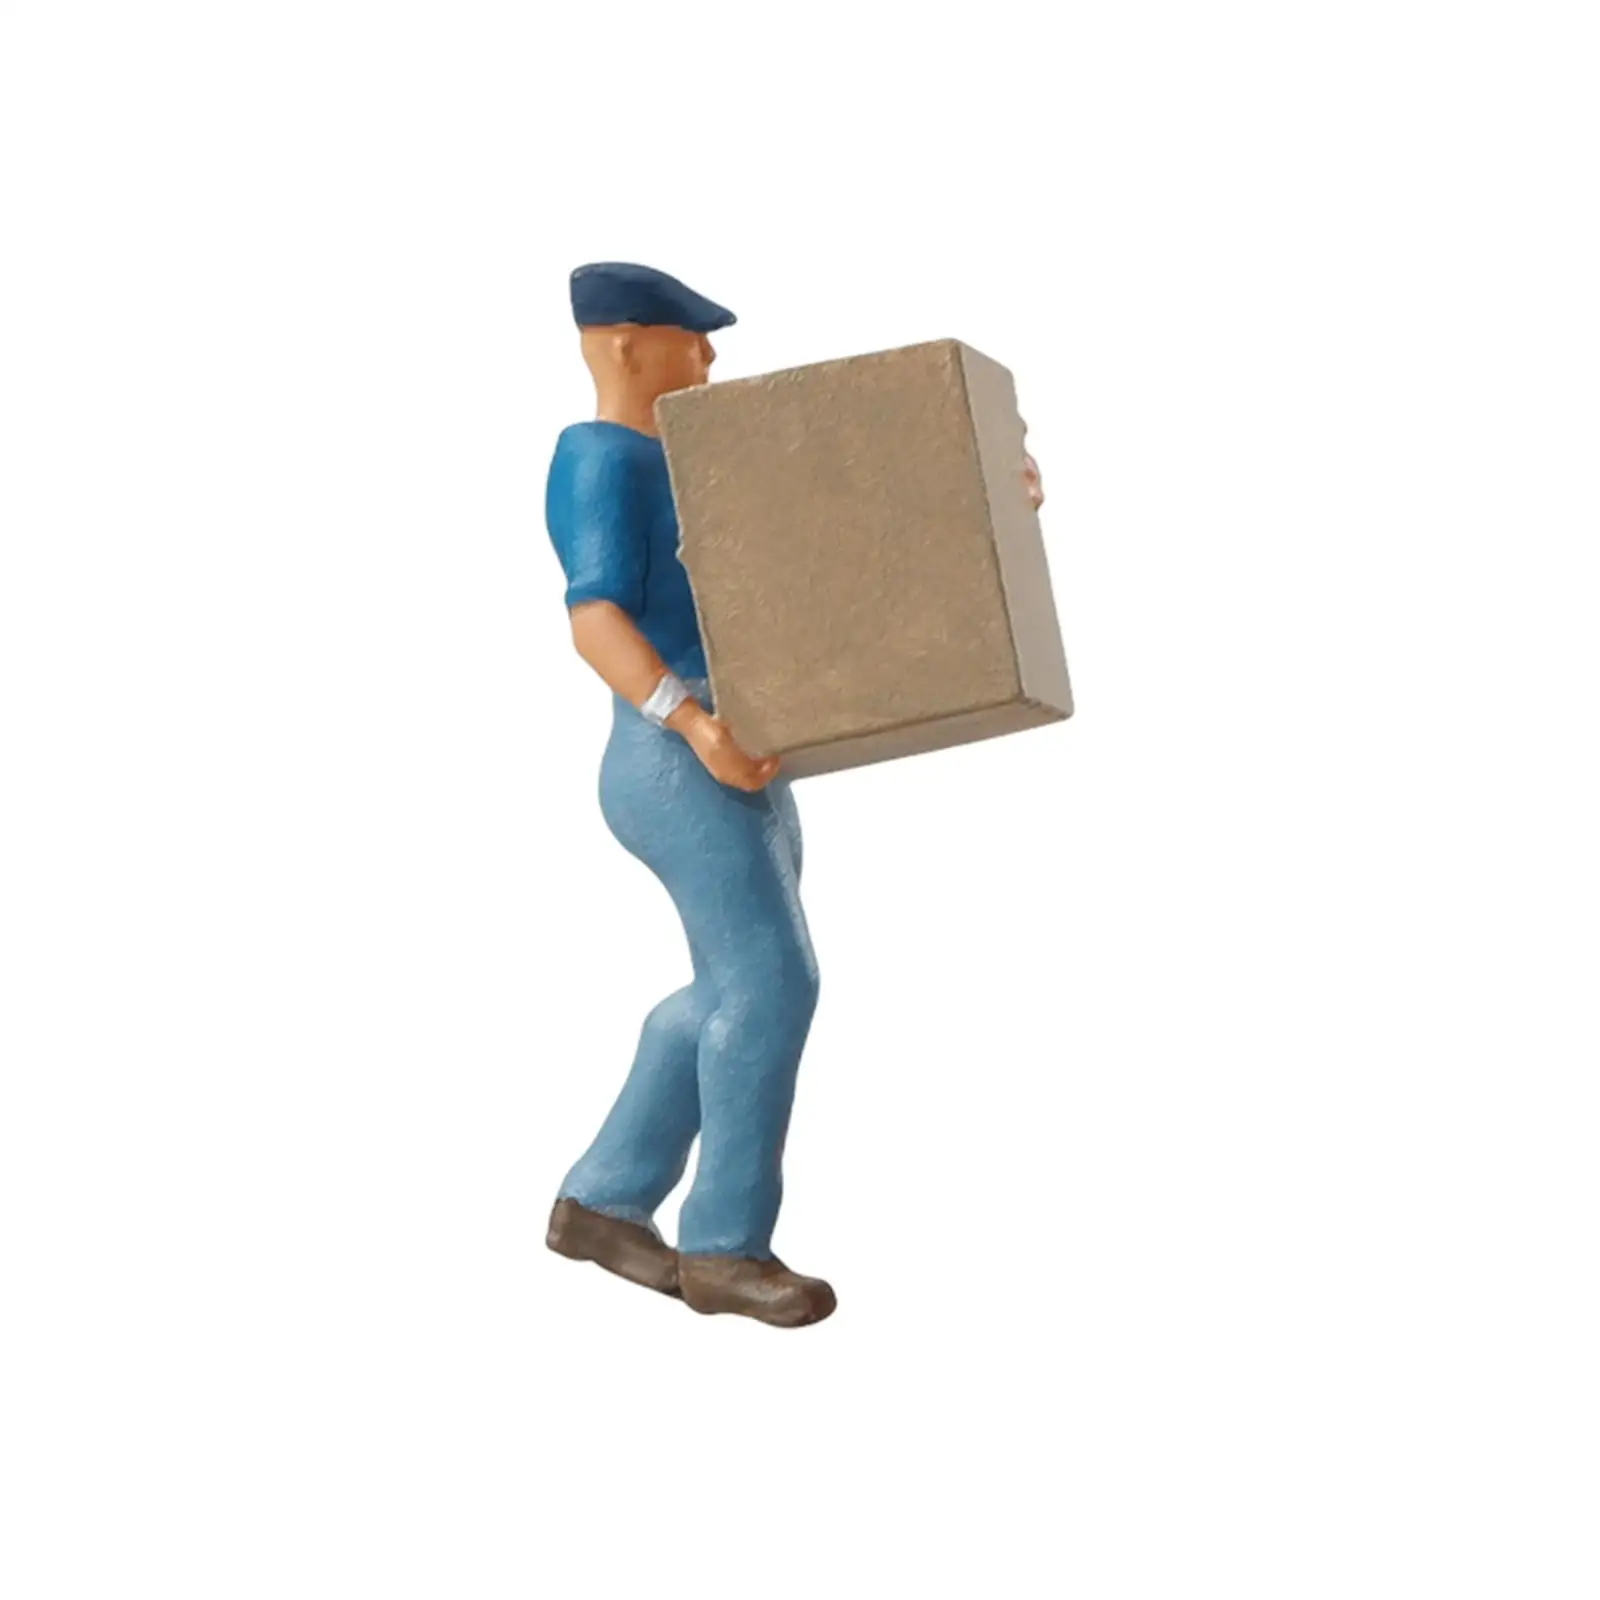 1/64 Delivery Man Model Porter People Figurine Character Model for Micro Landscape